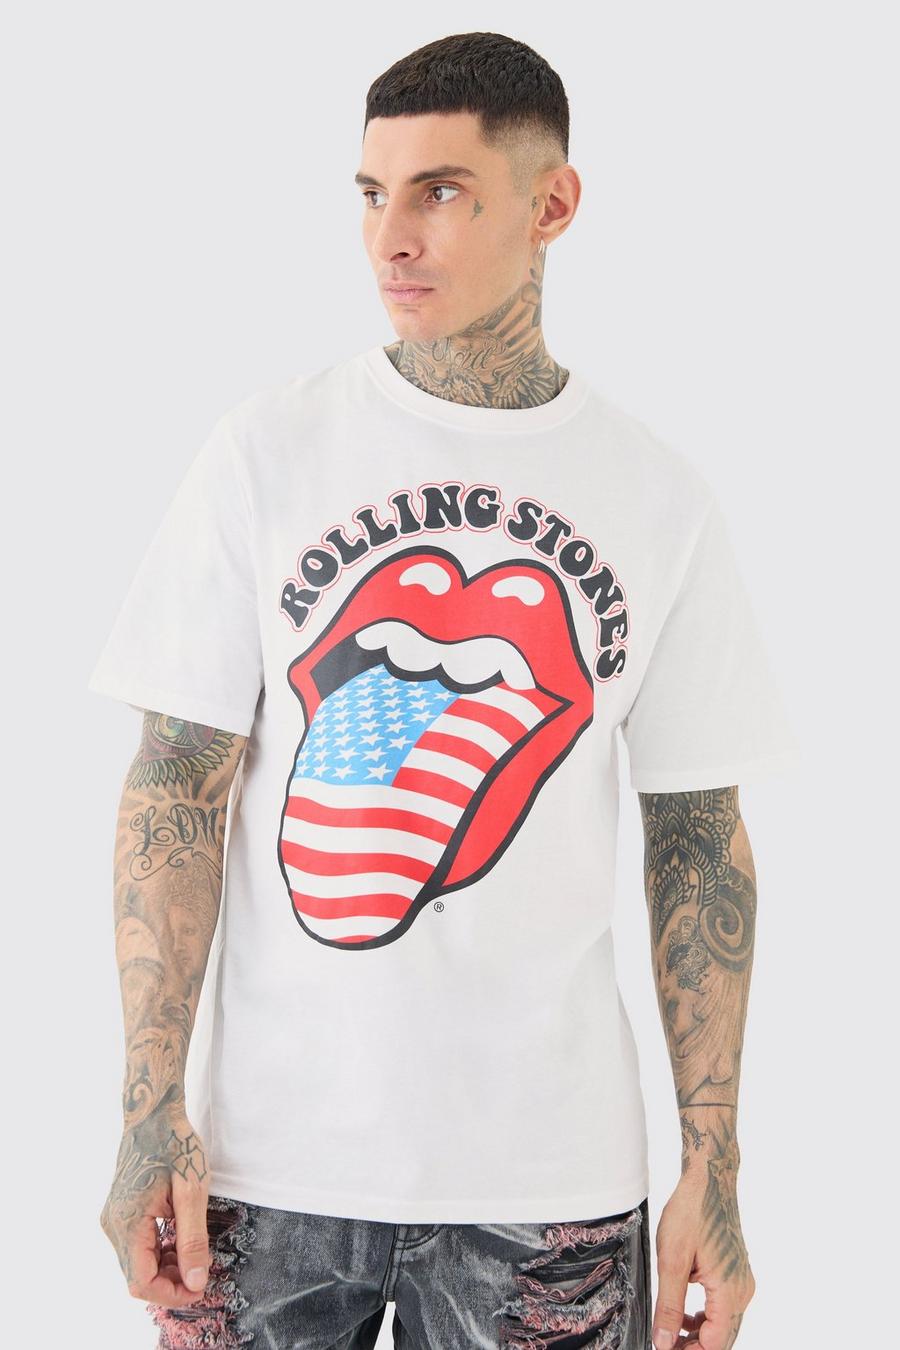 Tall Oversized Rolling Stones License T-shirt White